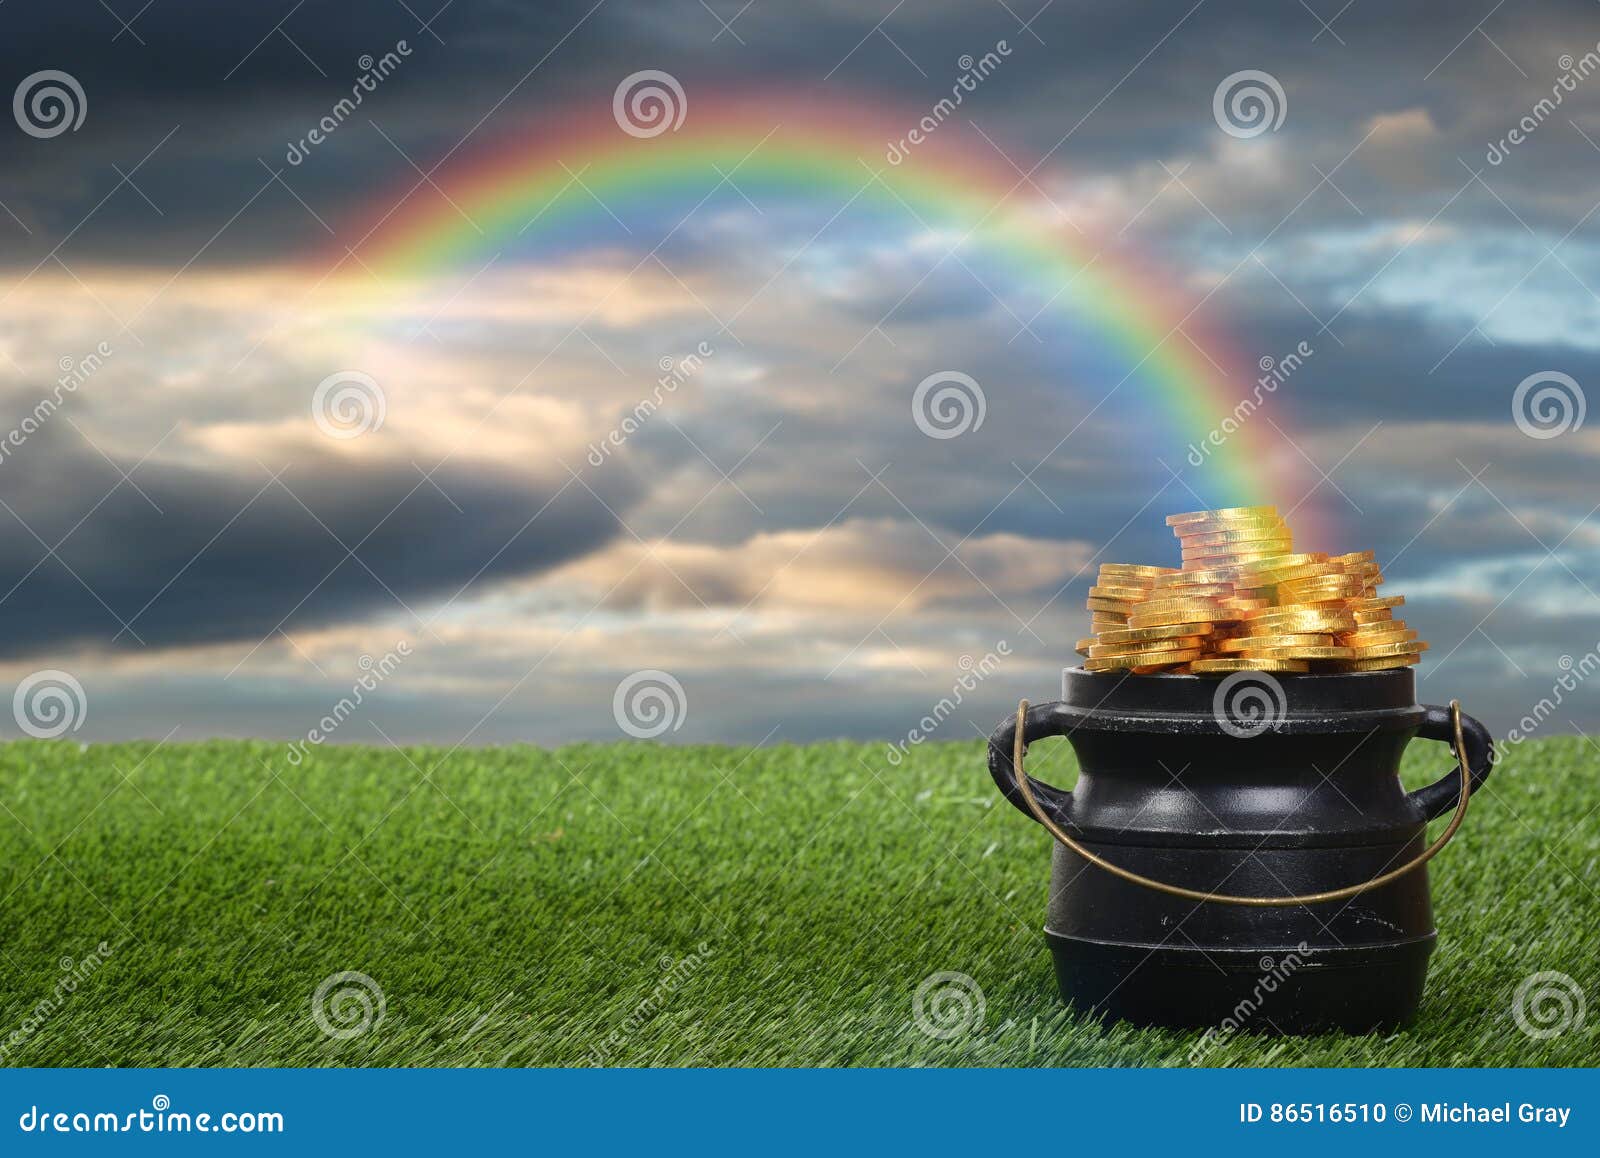 pot of gold with rainbow